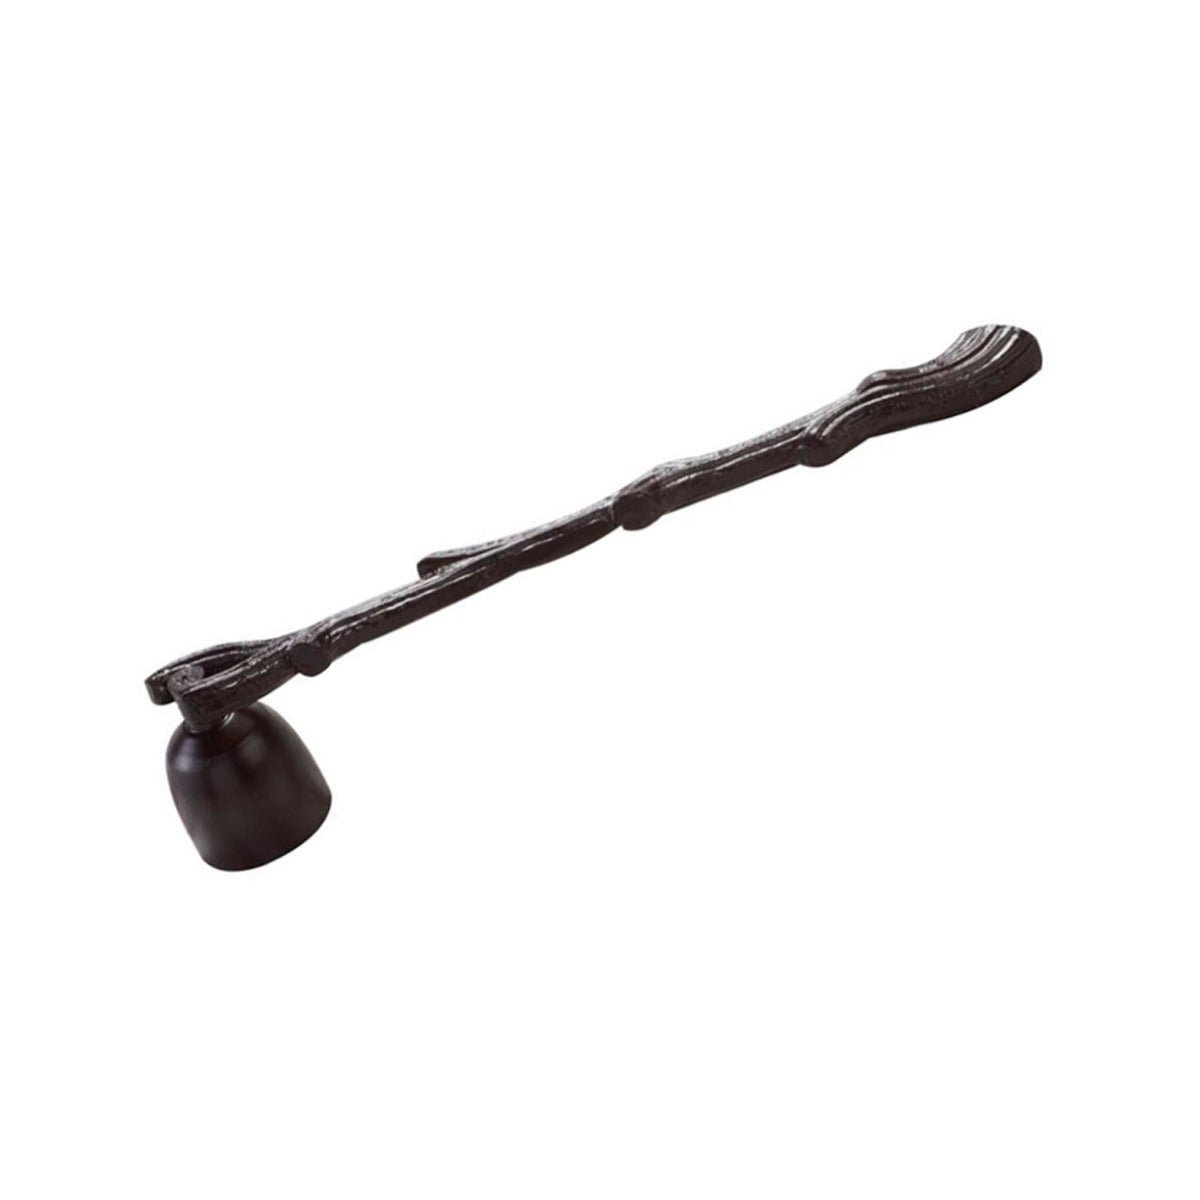 Antiqued Branch Snuffer - 13 Moons